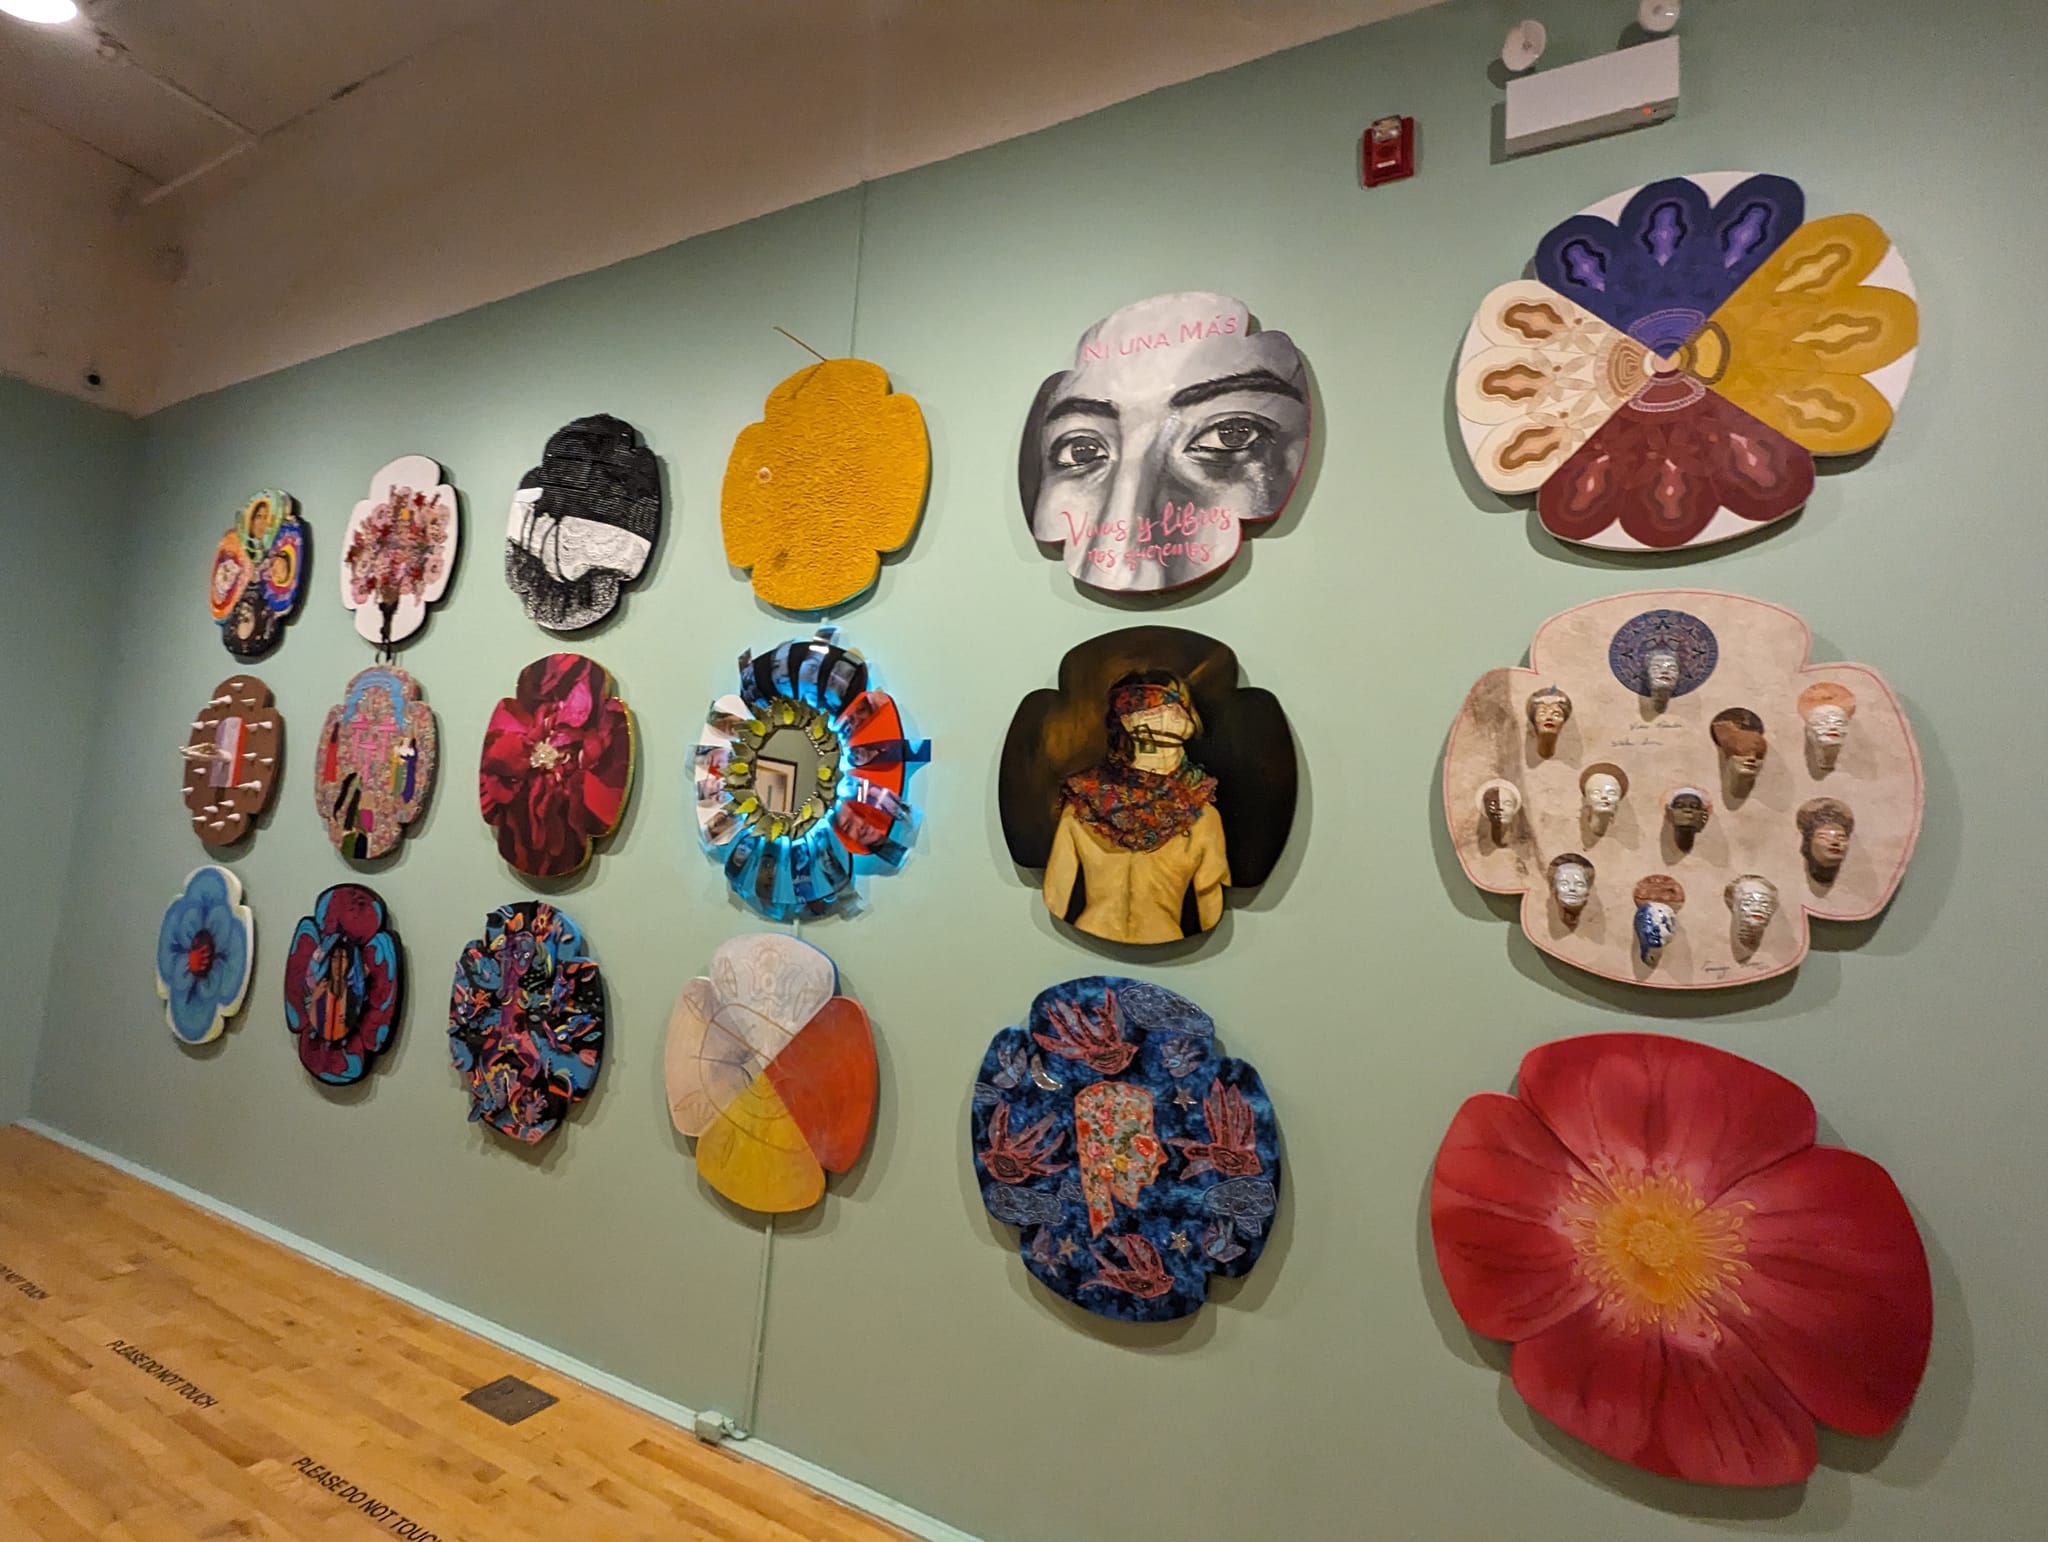 A wall full of flowers with 4 petals all created by different Chicago artists